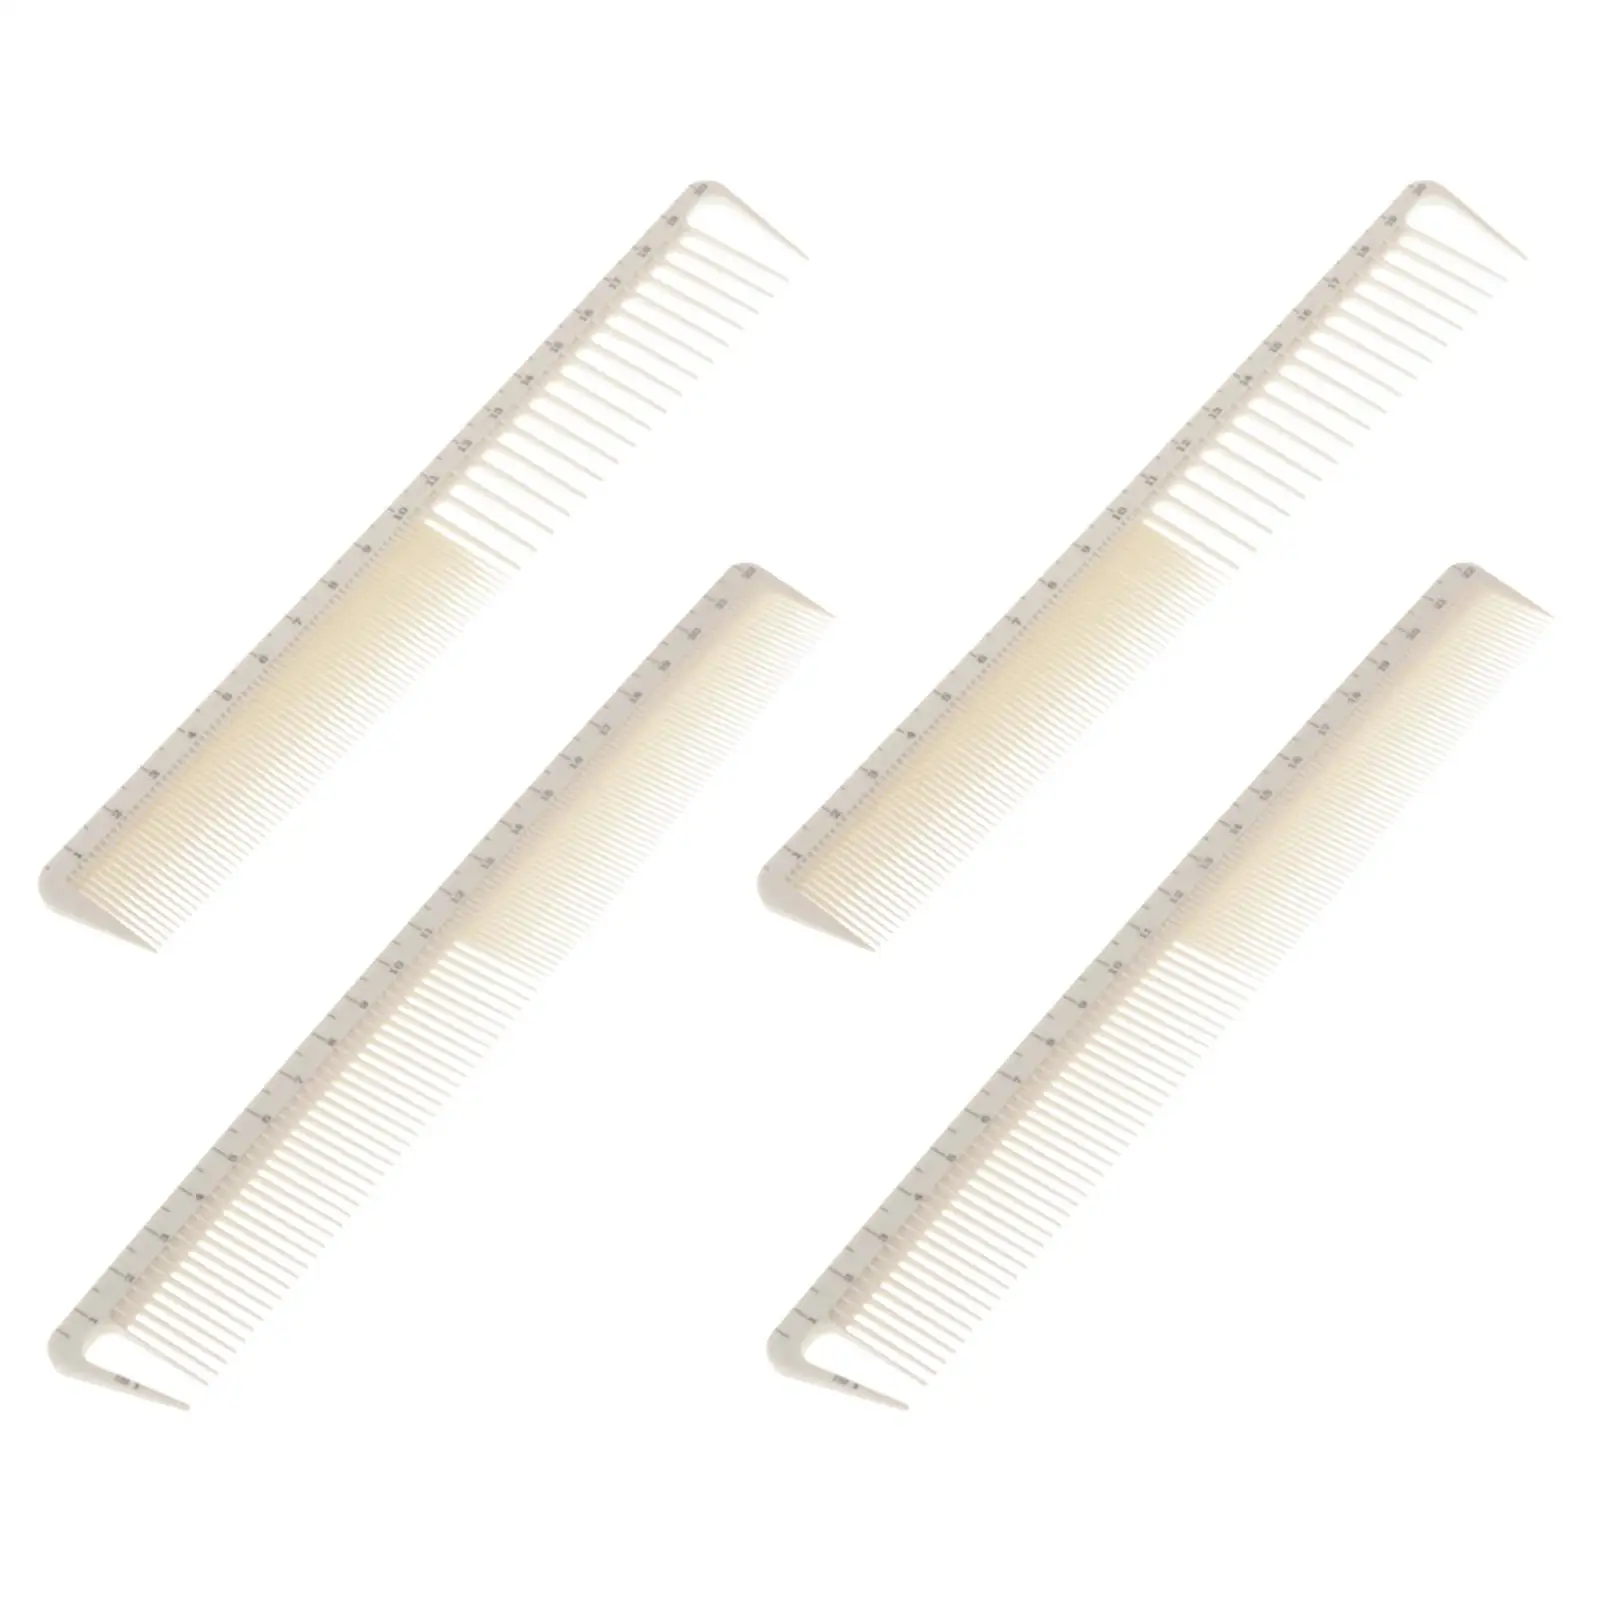 4x Professional Salon Barber Hairdressing Resin Comb Hair Comb with Scales